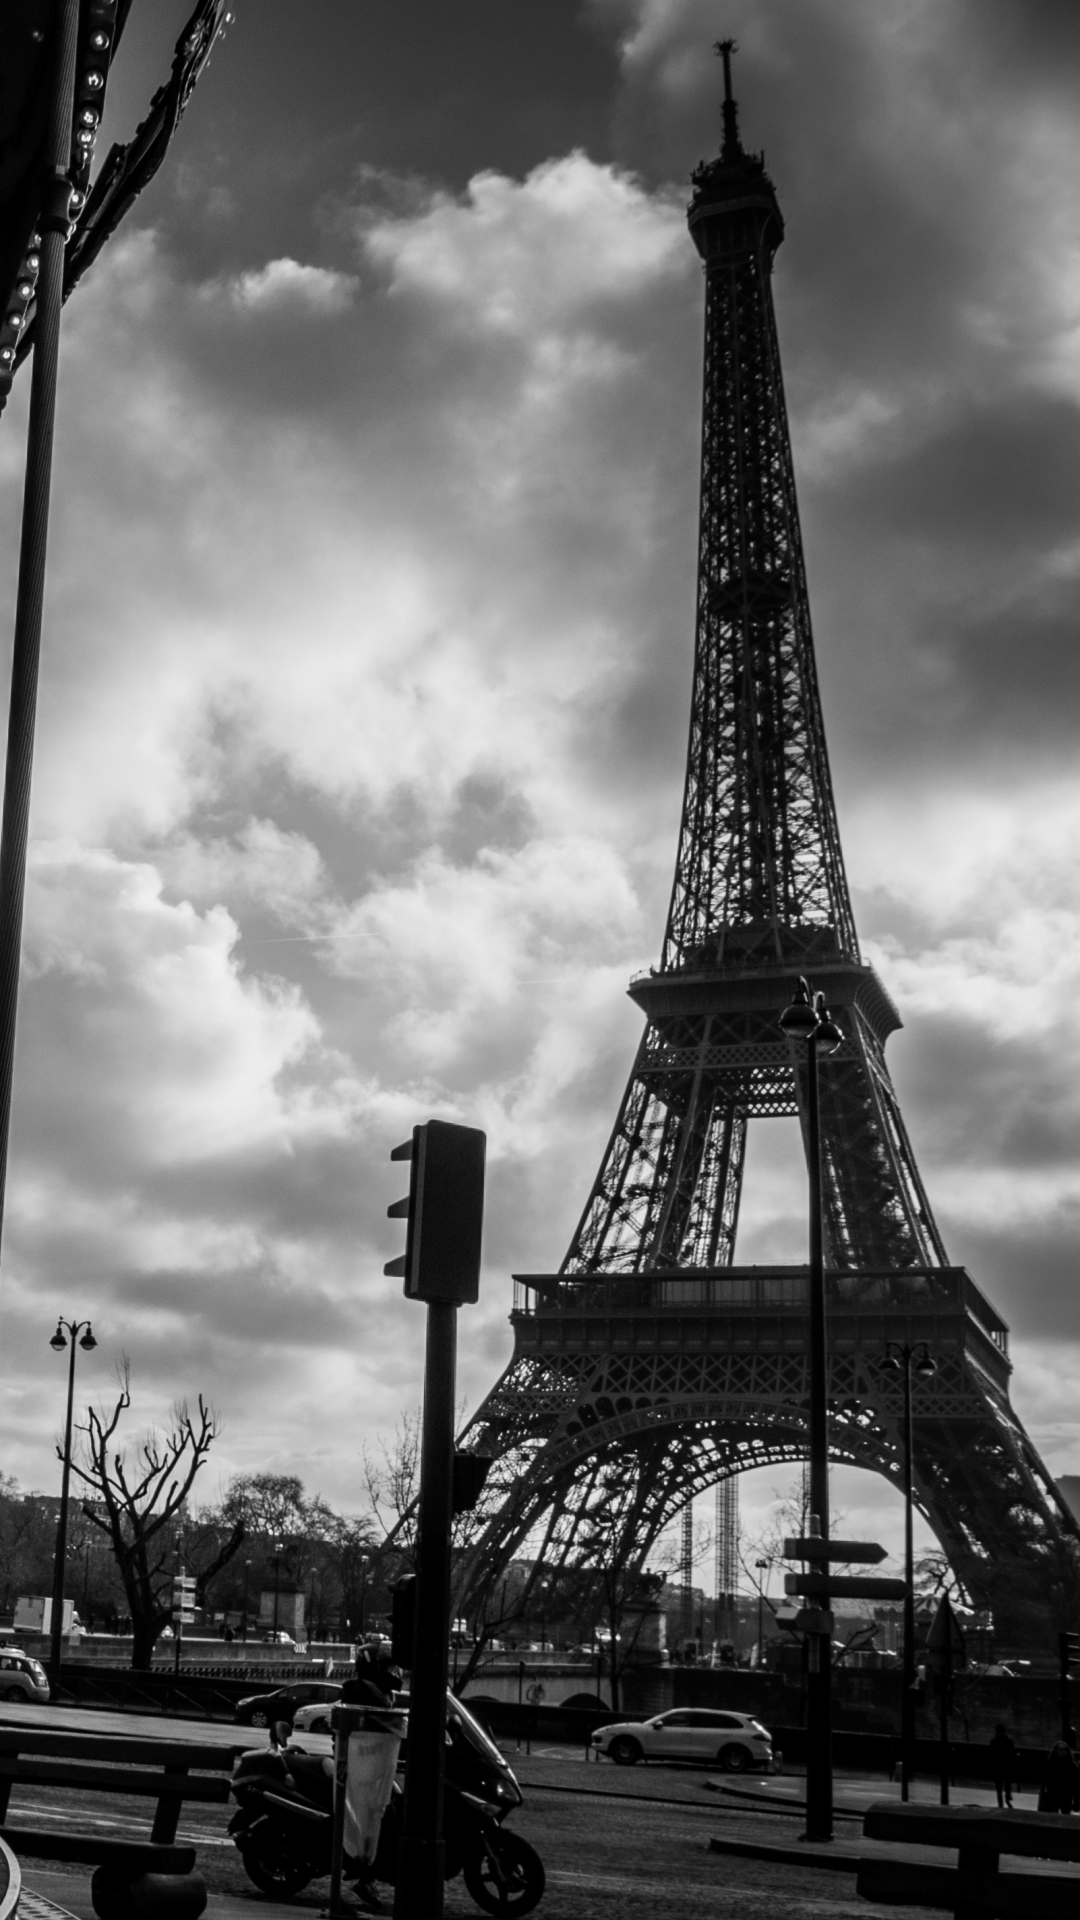 android man made, eiffel tower, france, carousel, paris, black & white, monuments